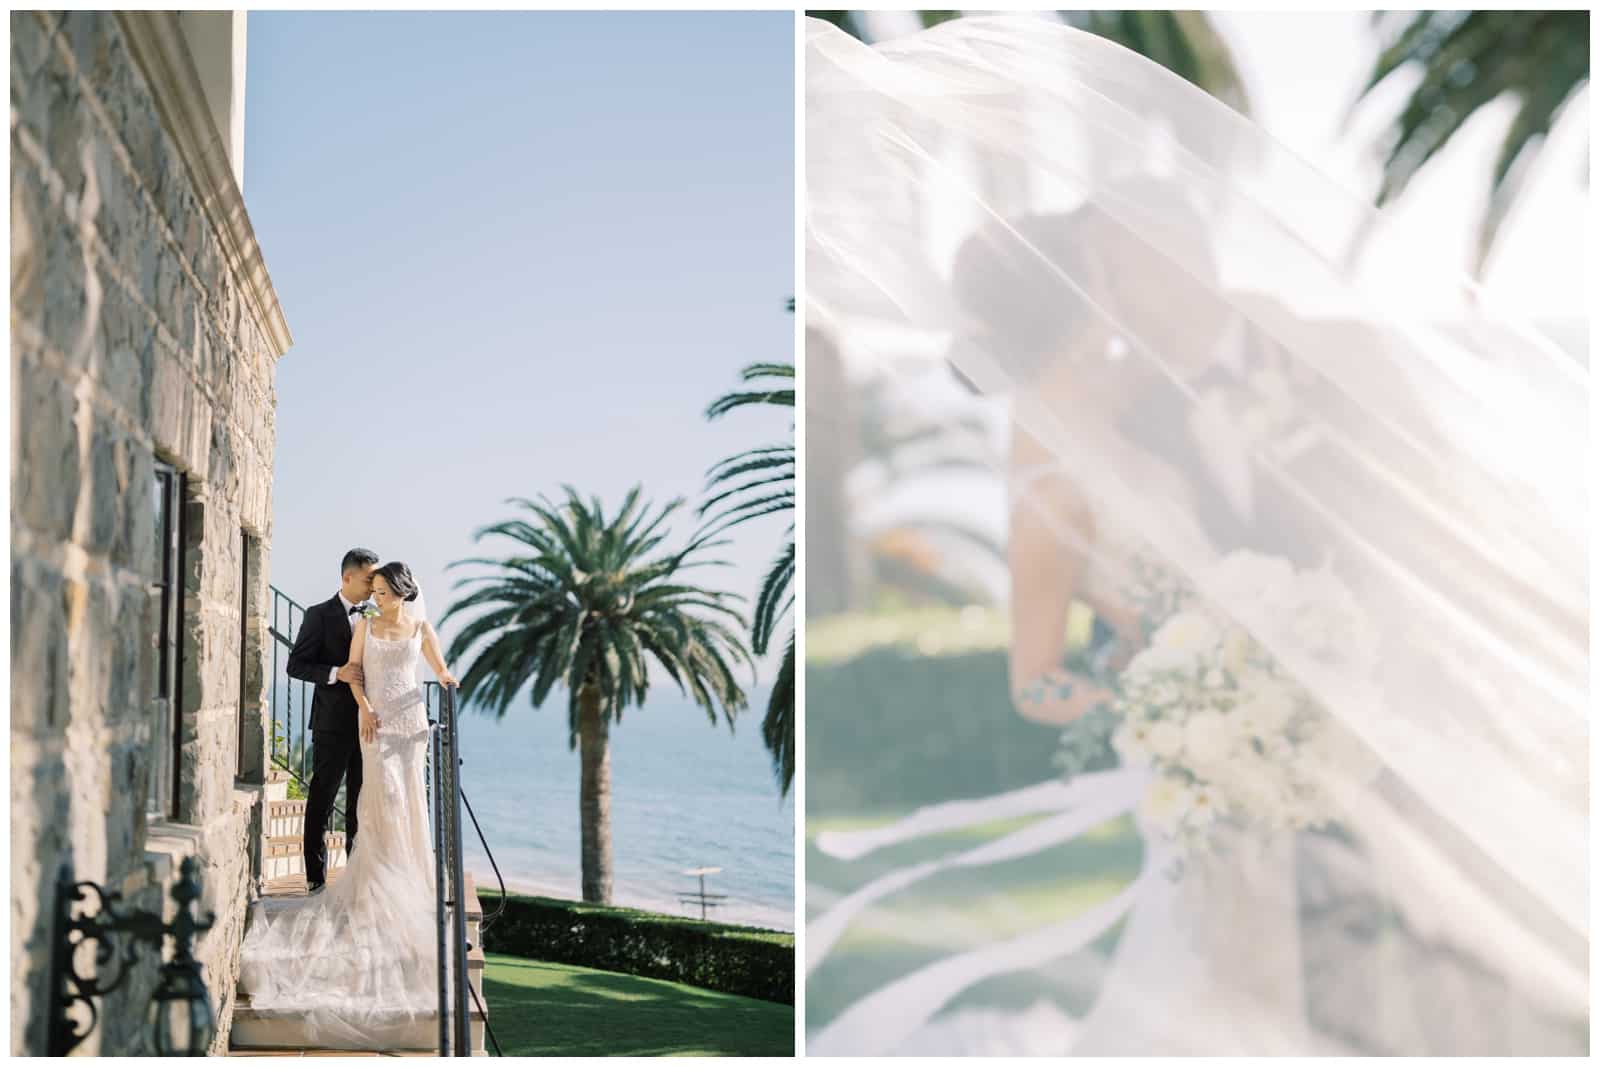 bel-air bay club wedding photographer in los angeles pacific palisades southern california